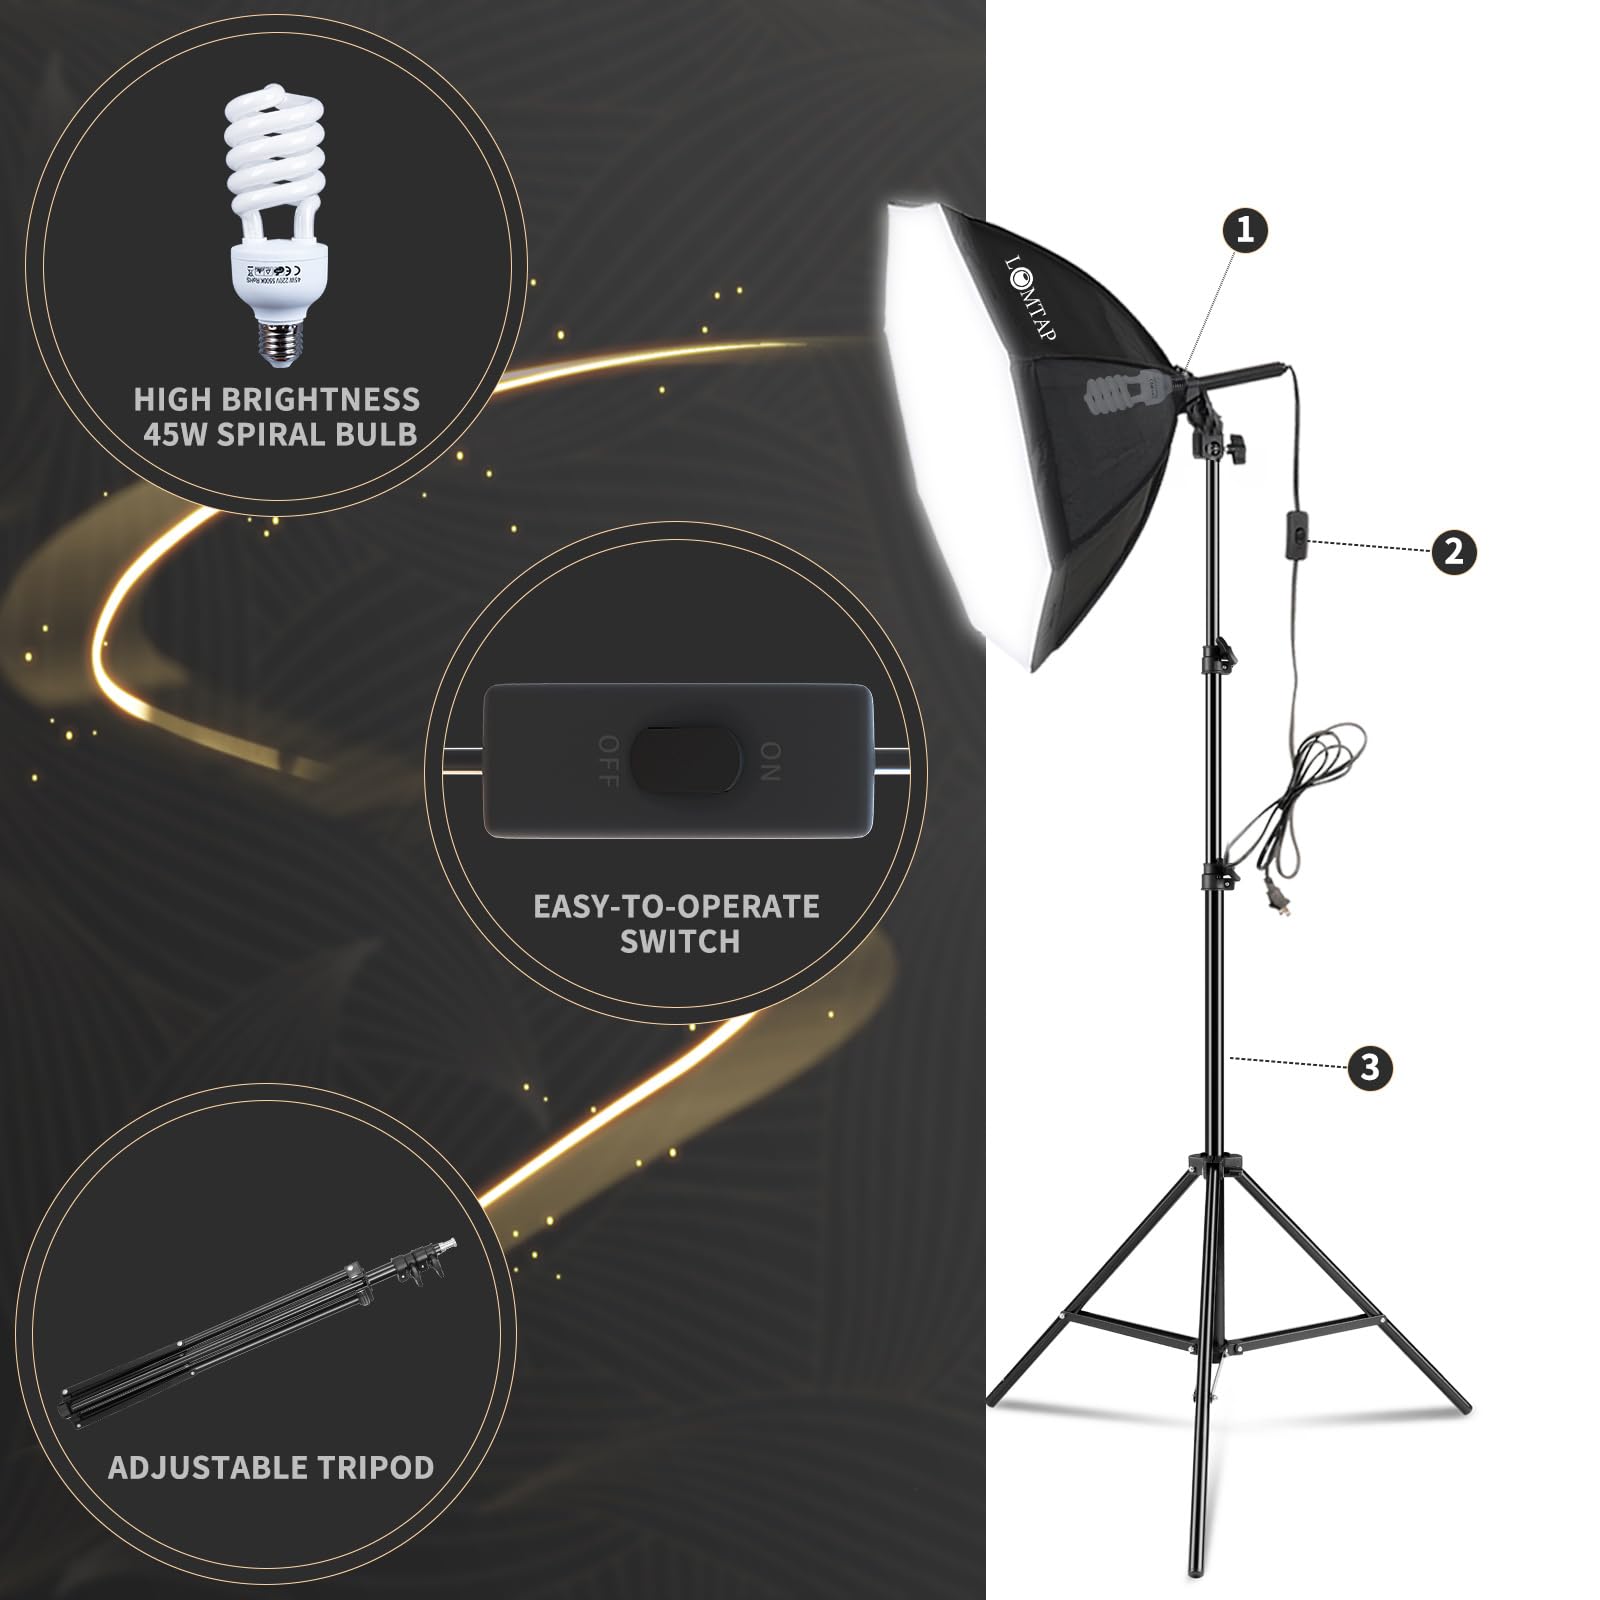 LOMTAP Backdrop Stand 6.5ft x 9.8ft Green Screen Photography Lighting Kit 2 Softboxes 3 Photo Umbrellas 2 in 1 Reflector Accessories for Parties Video Equipments Studio Lights